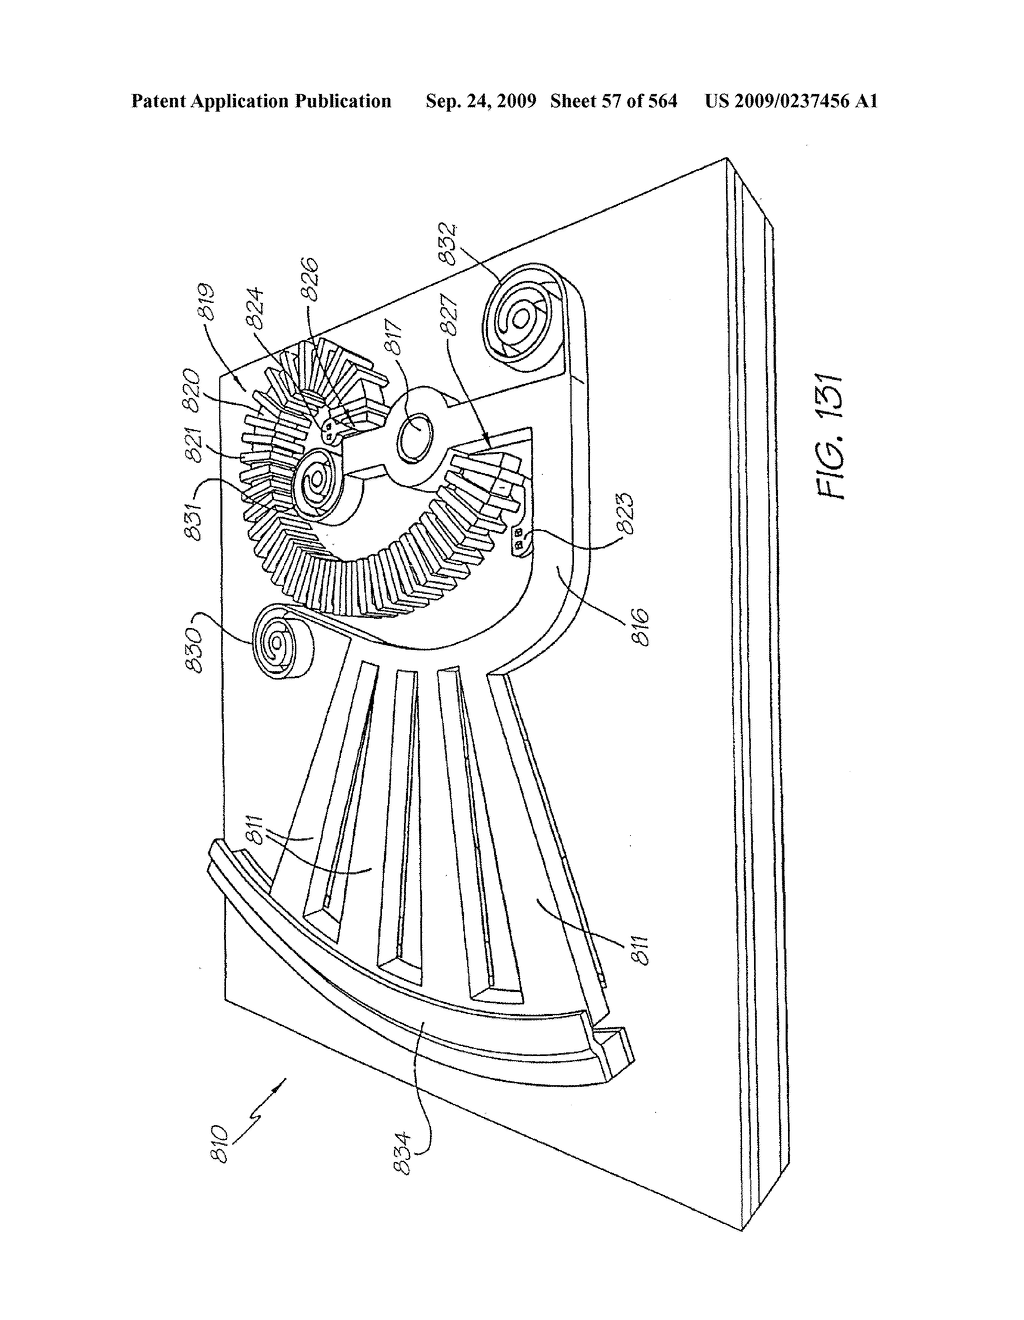 Inkjet Printhead With Paddle For Ejecting Ink From One Of Two Nozzles - diagram, schematic, and image 58